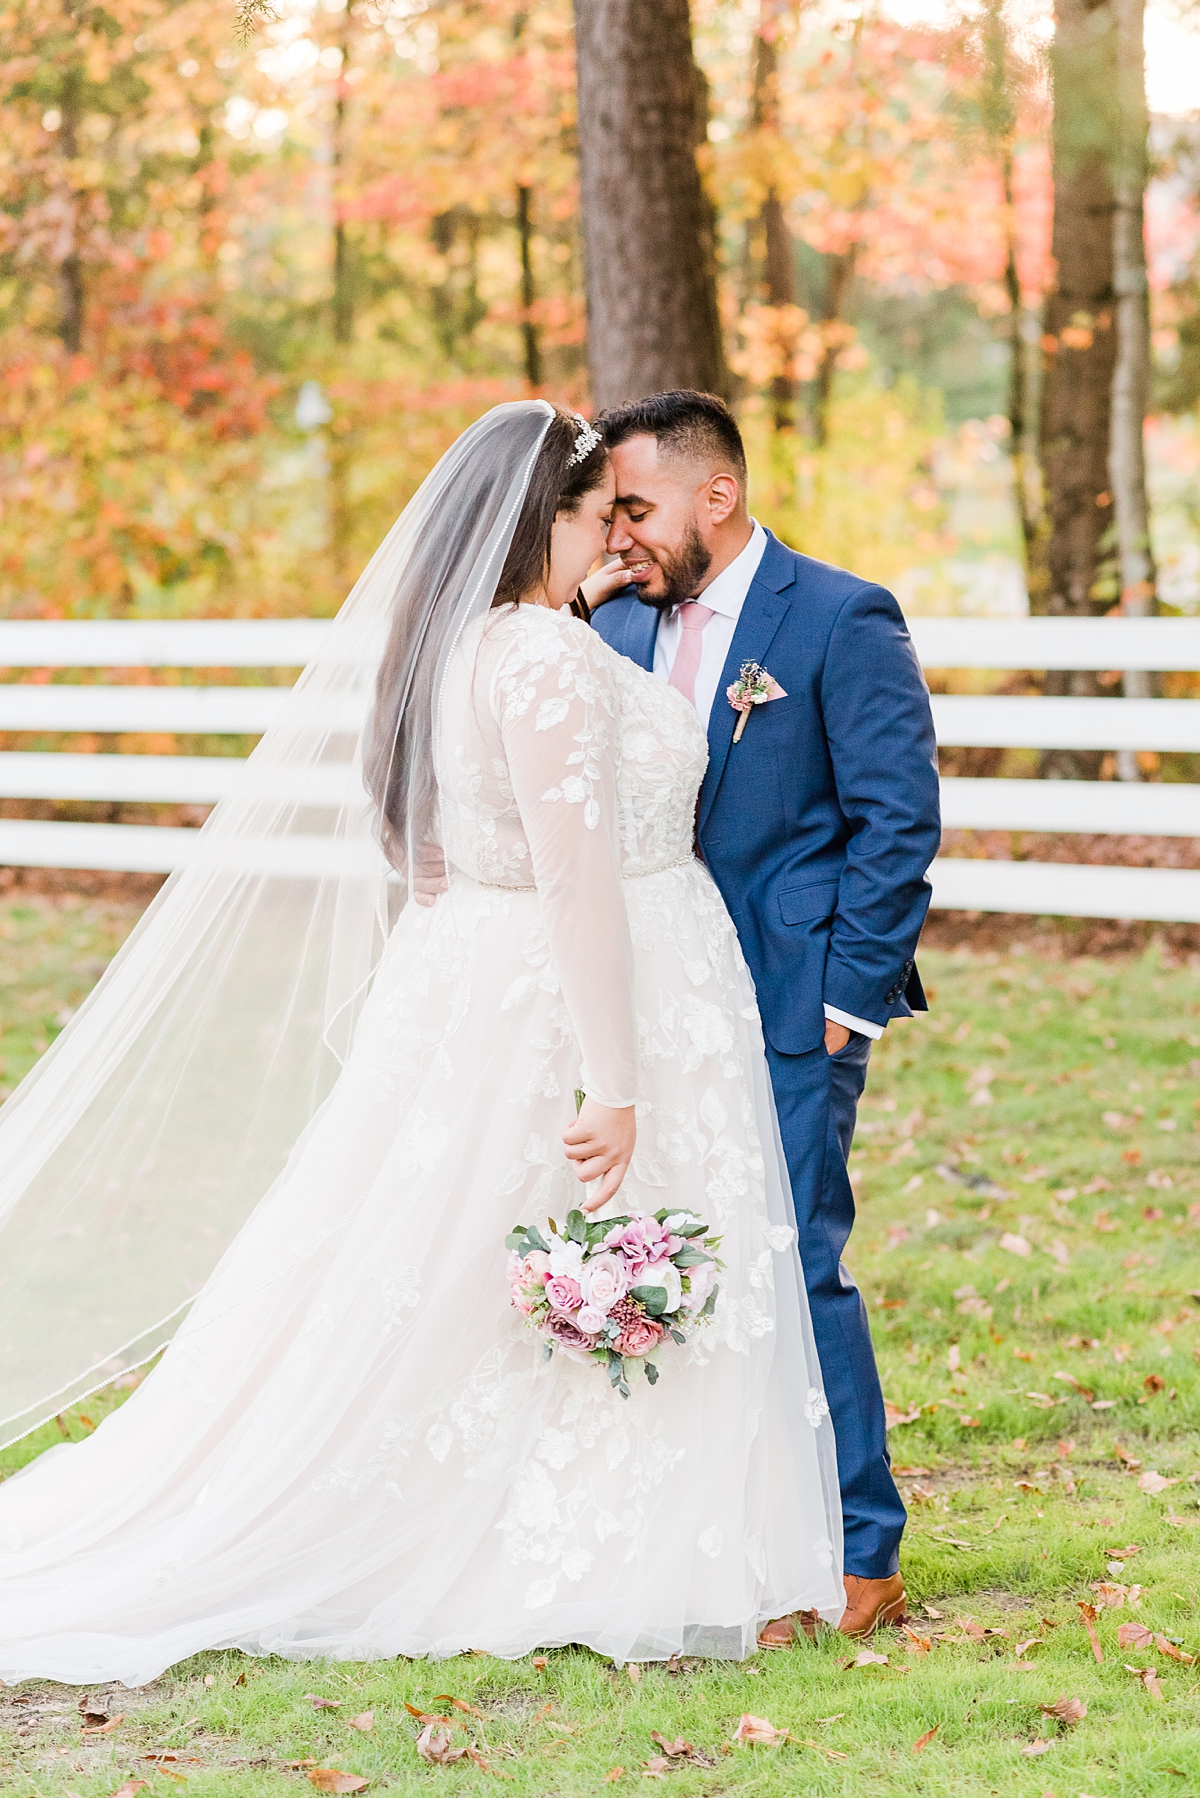 Bride and Groom Portraits with Veil at Virginia Cliffe Inn Wedding. Wedding Photography by Richmond Wedding Photographer Kailey Brianne Photography.